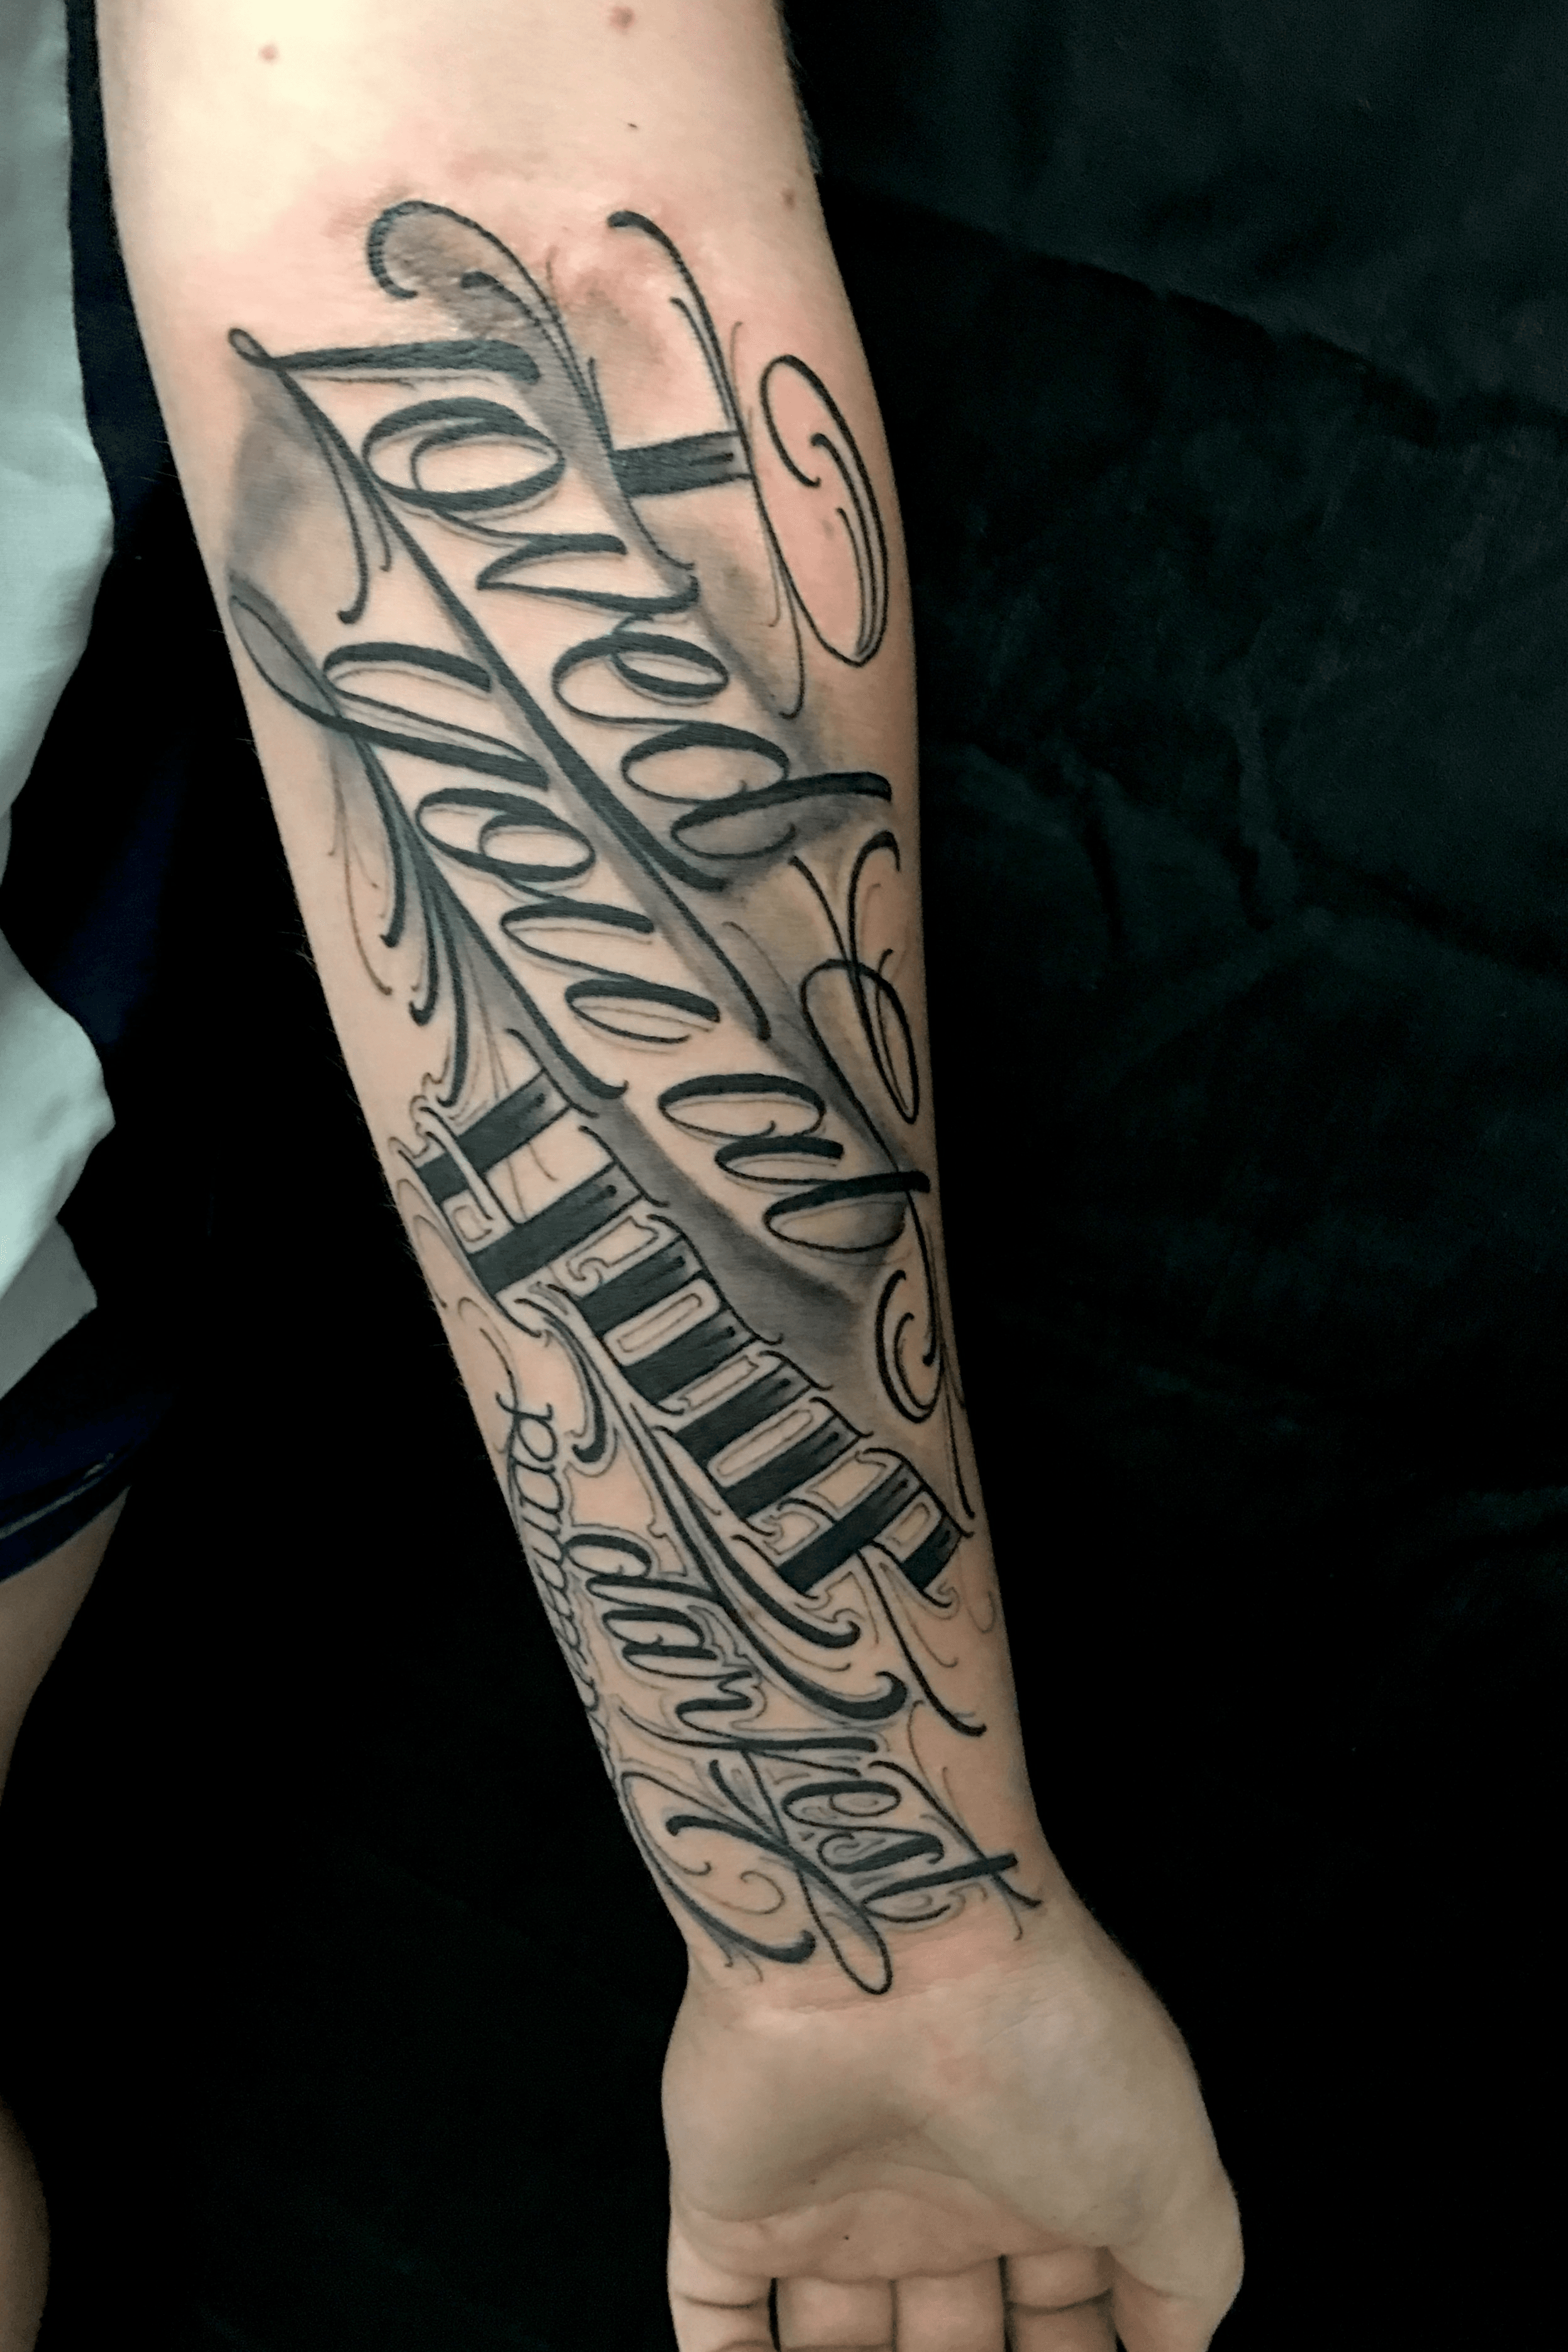 Coastline Tattoo Studio Provincetown  Elijah Classy drawnon script by  cocheese323 Kris is available for custom drawn tattoos MondaysWednesdays  To book with him please email coastlinetattoogmailcom script drawnon  tattoo coastlinetattoo 